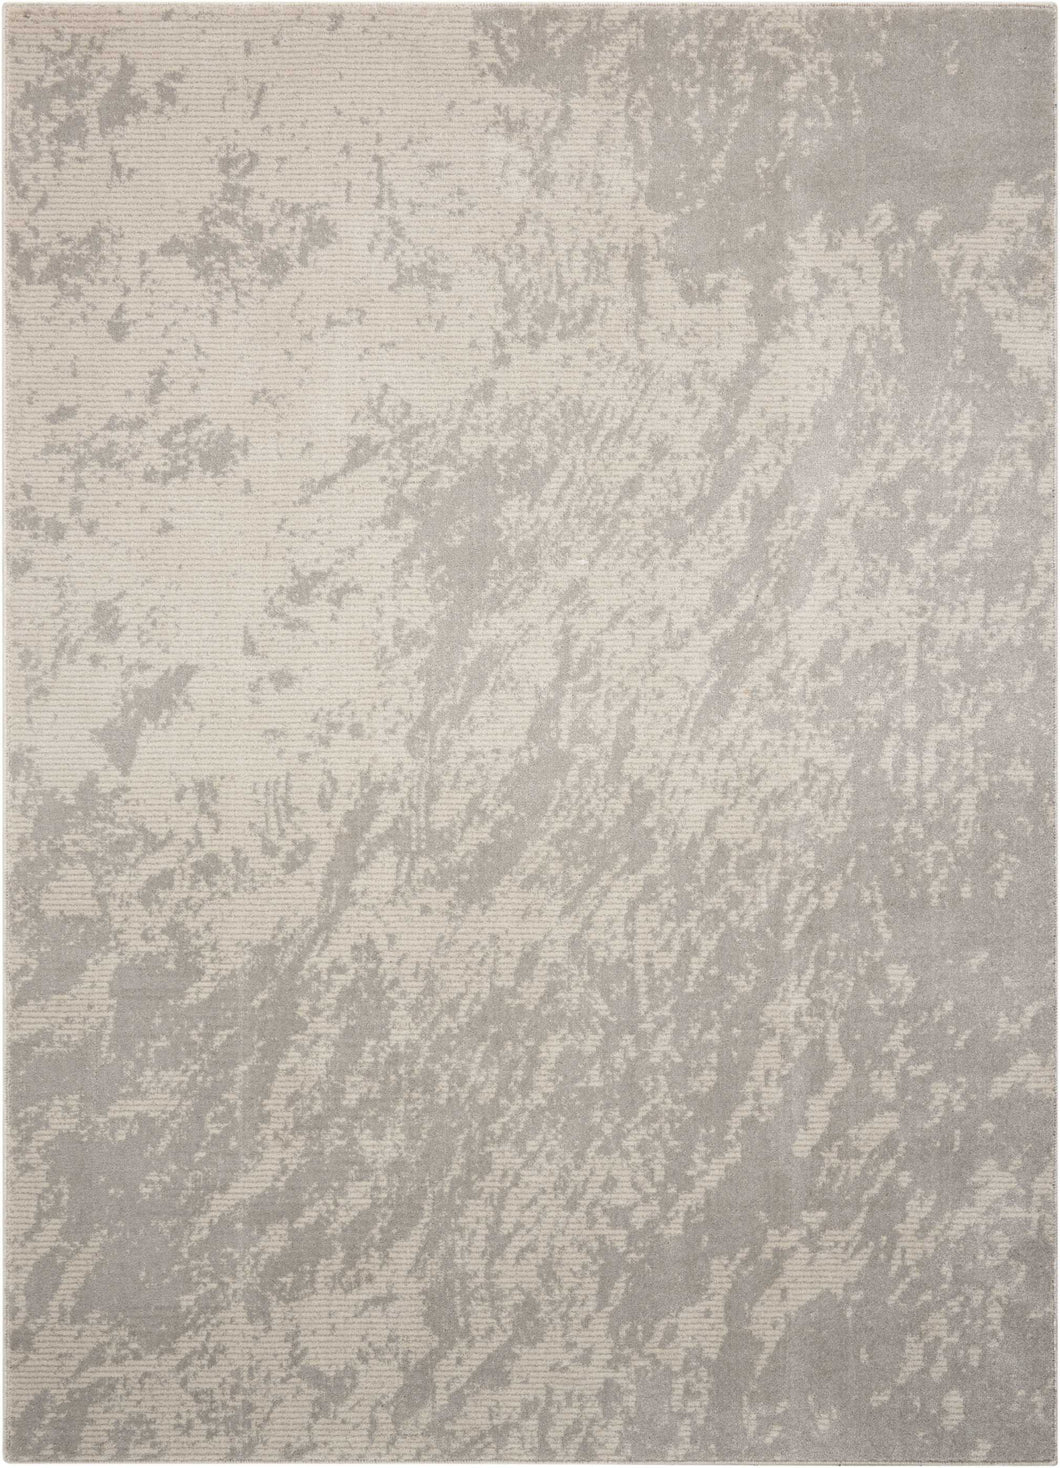 Nourison Maxell MAE12 Grey and White 5'x7' Area Rug MAE12 Ivory/Grey